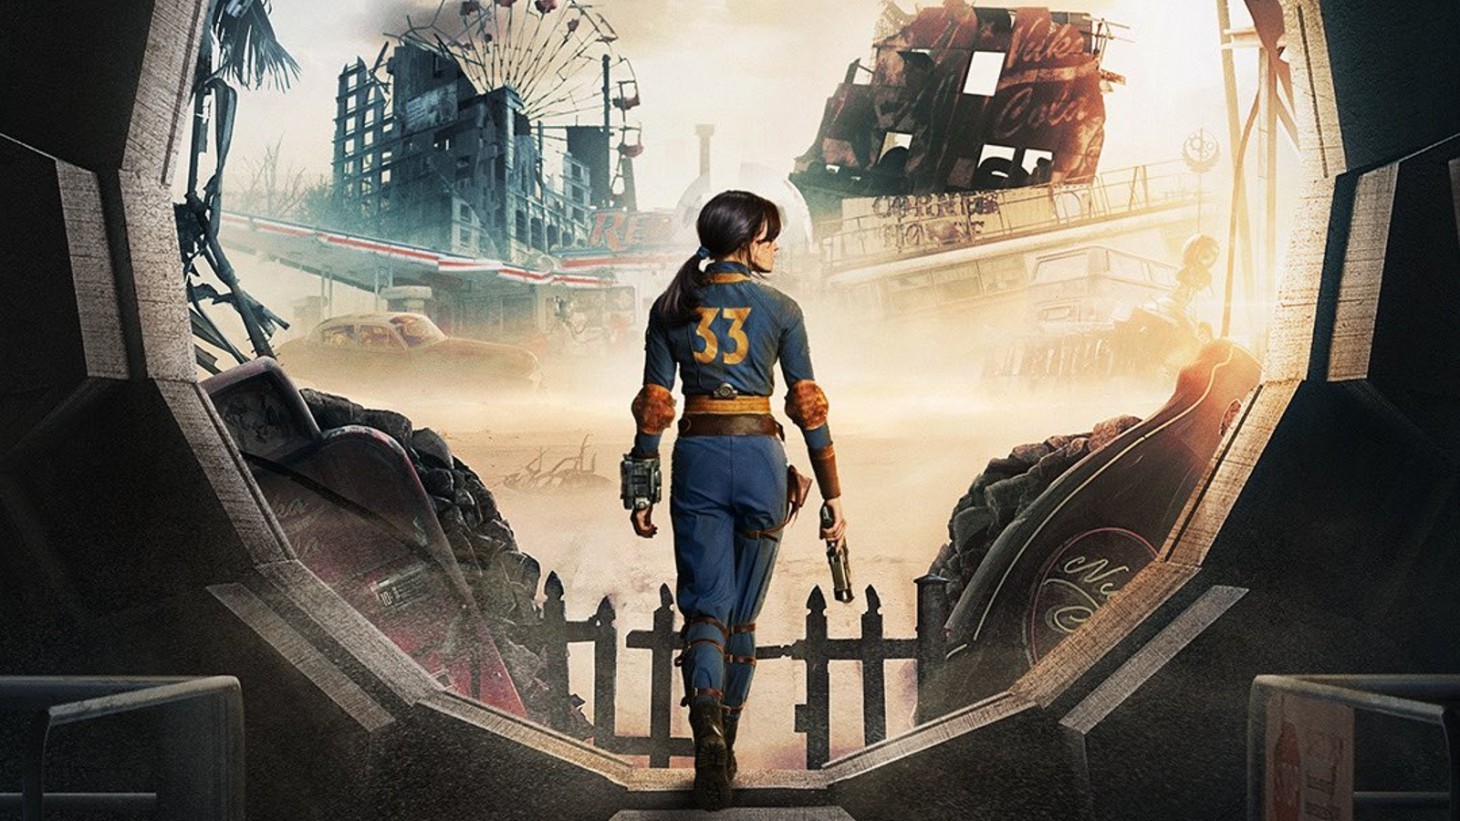 A promotional for Fallout